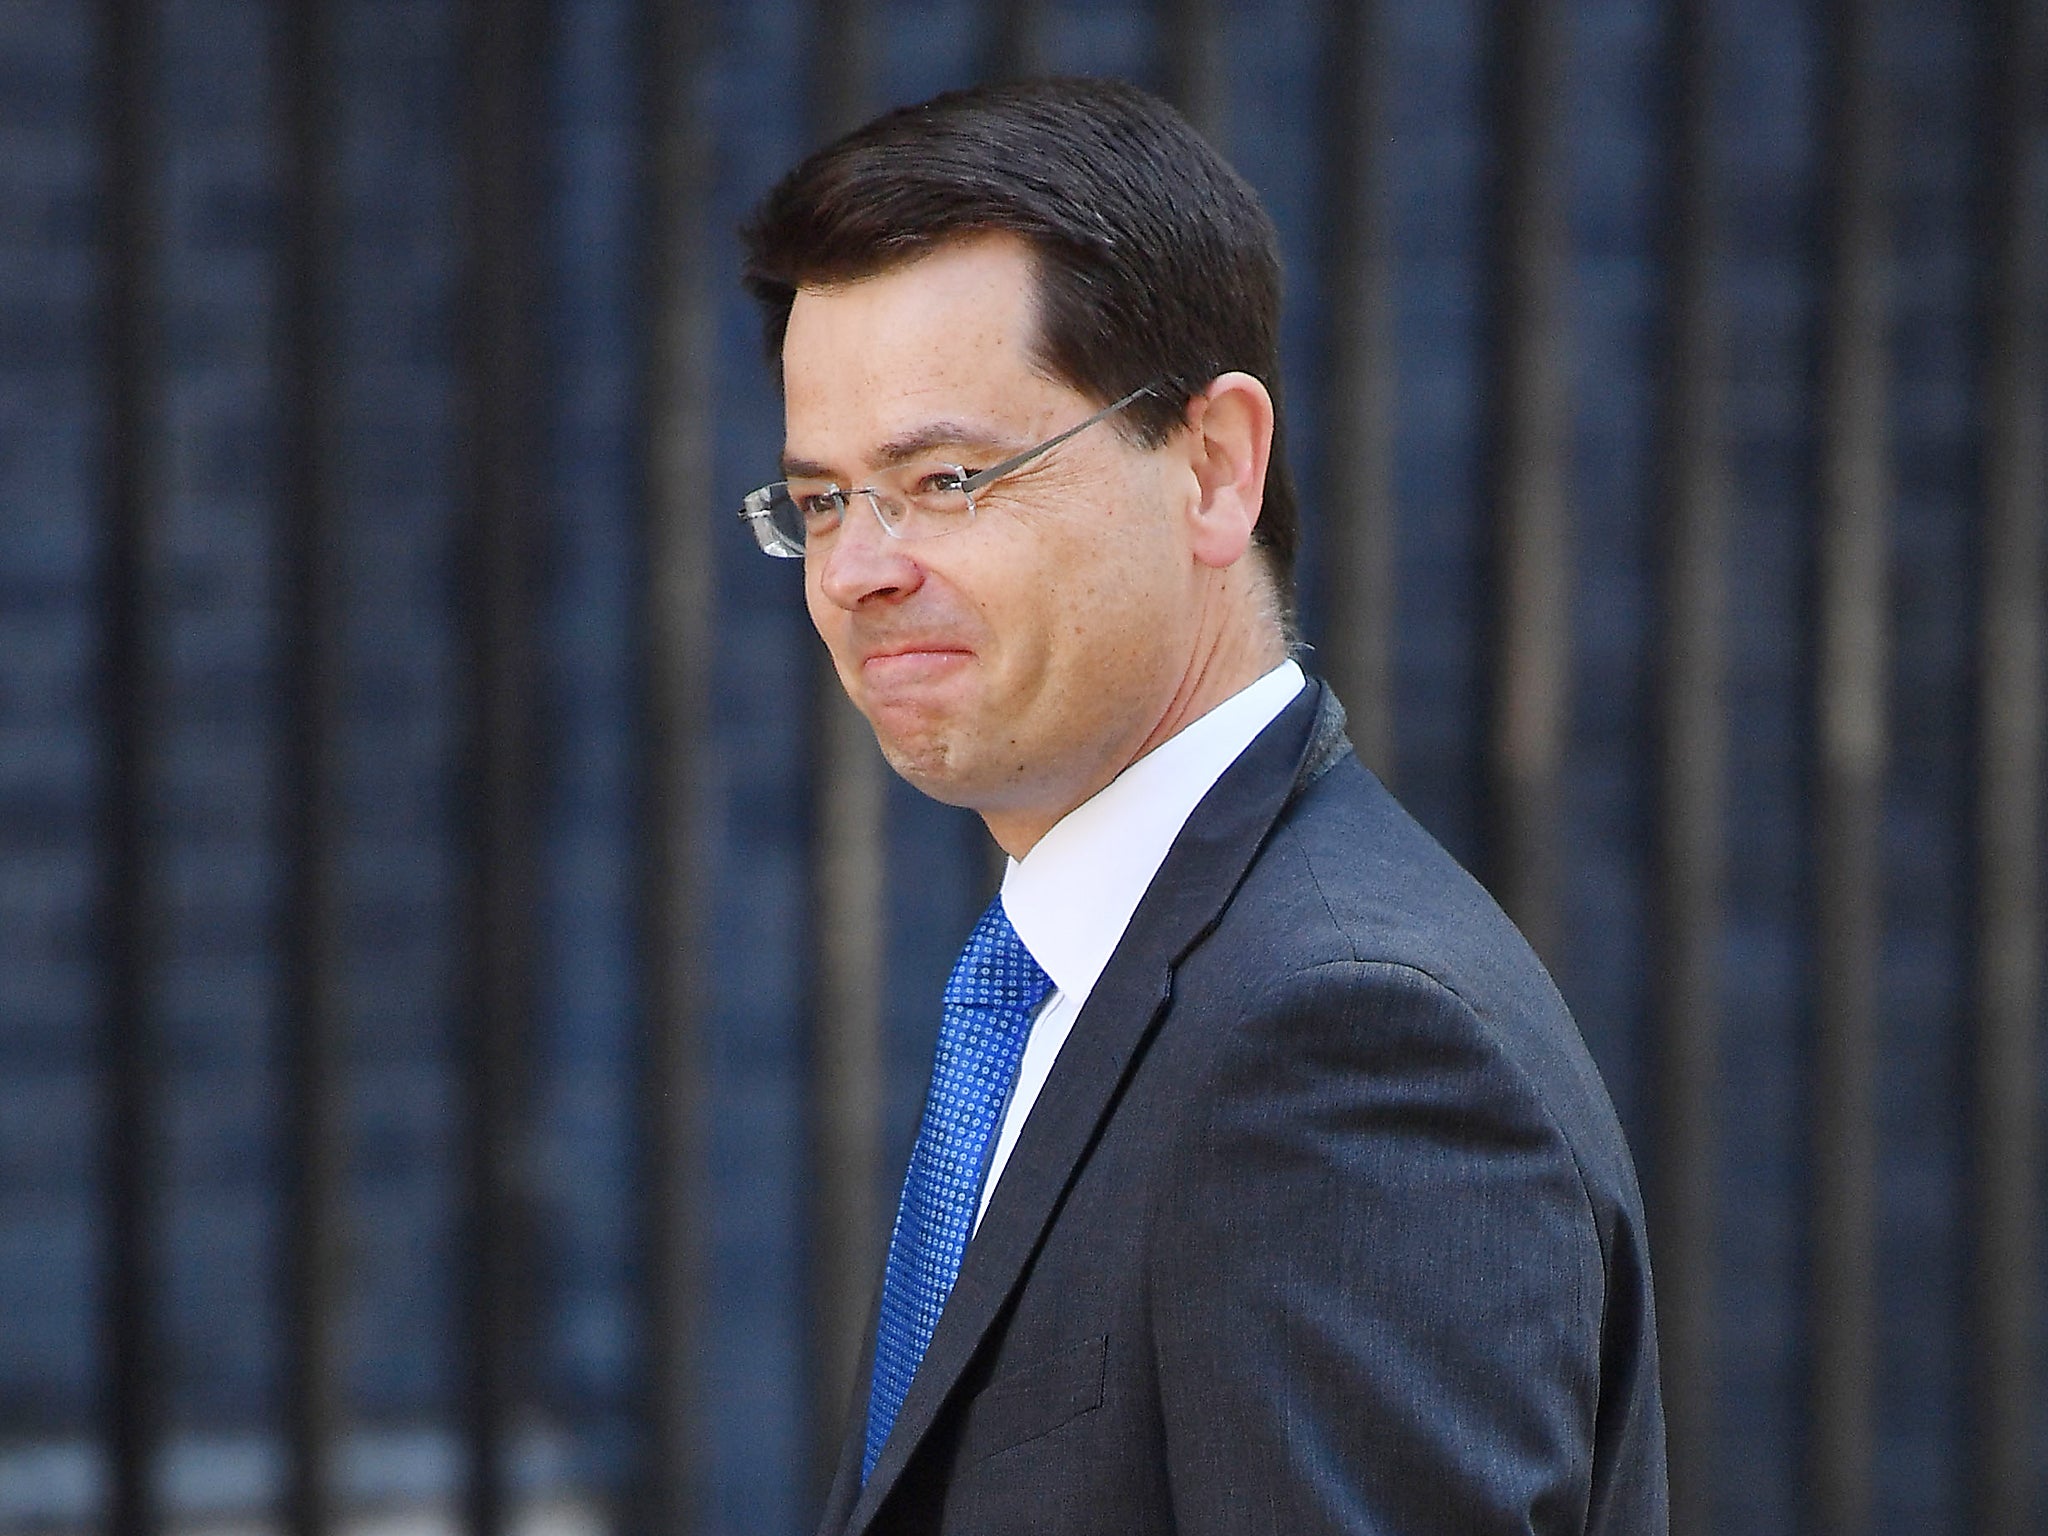 Northern Ireland Secretary James Brokenshire has said that the DUP’s role propping up the Conservative Government does not ‘in any way’ undermine his position